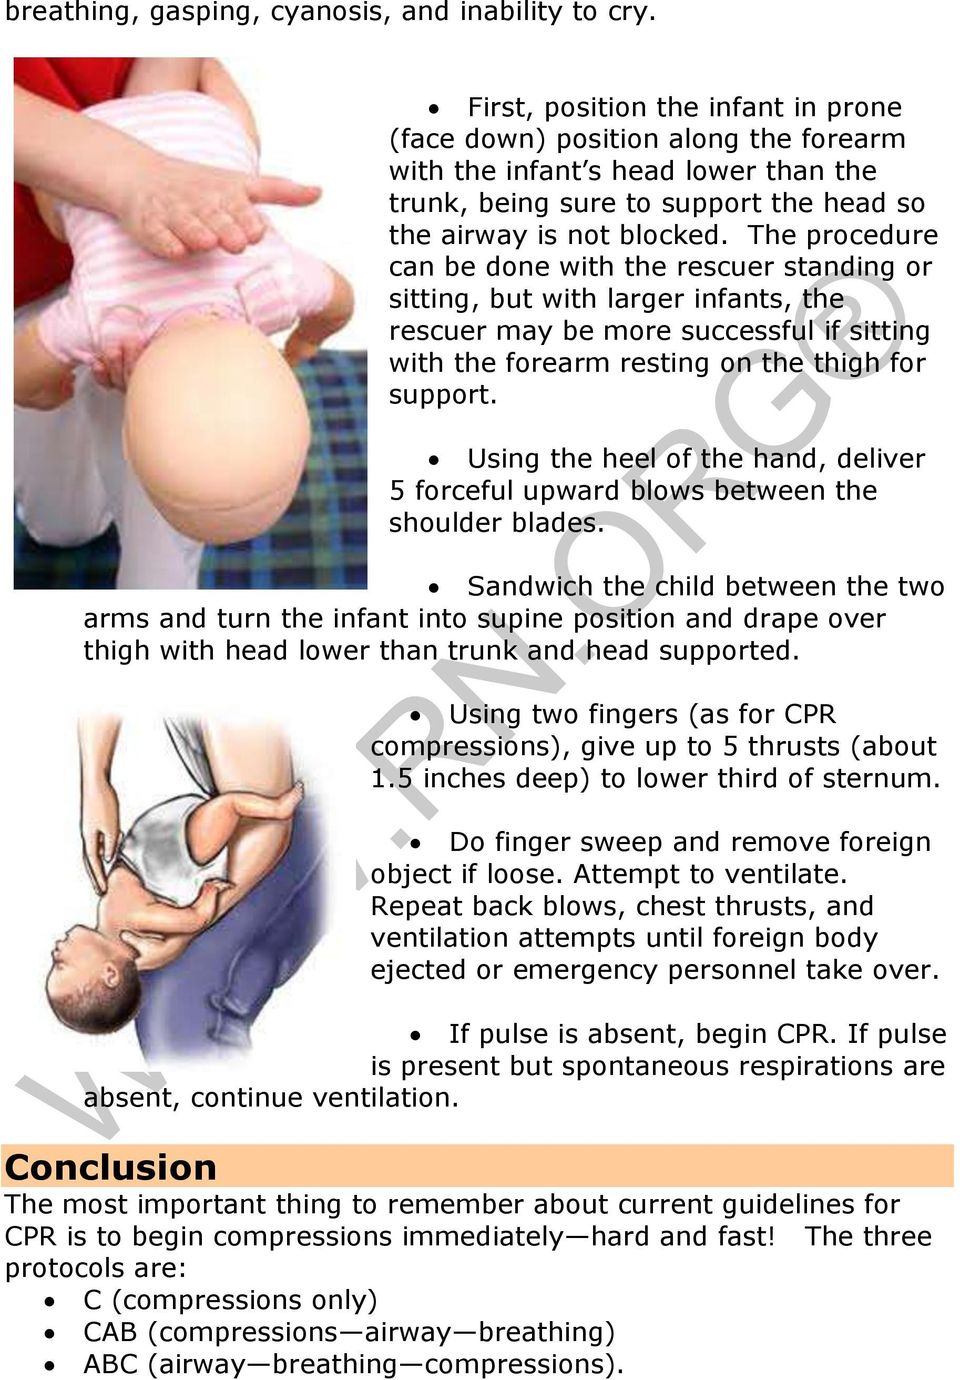 The procedure can be done with the rescuer standing or sitting, but with larger infants, the rescuer may be more successful if sitting with the forearm resting on the thigh for support.